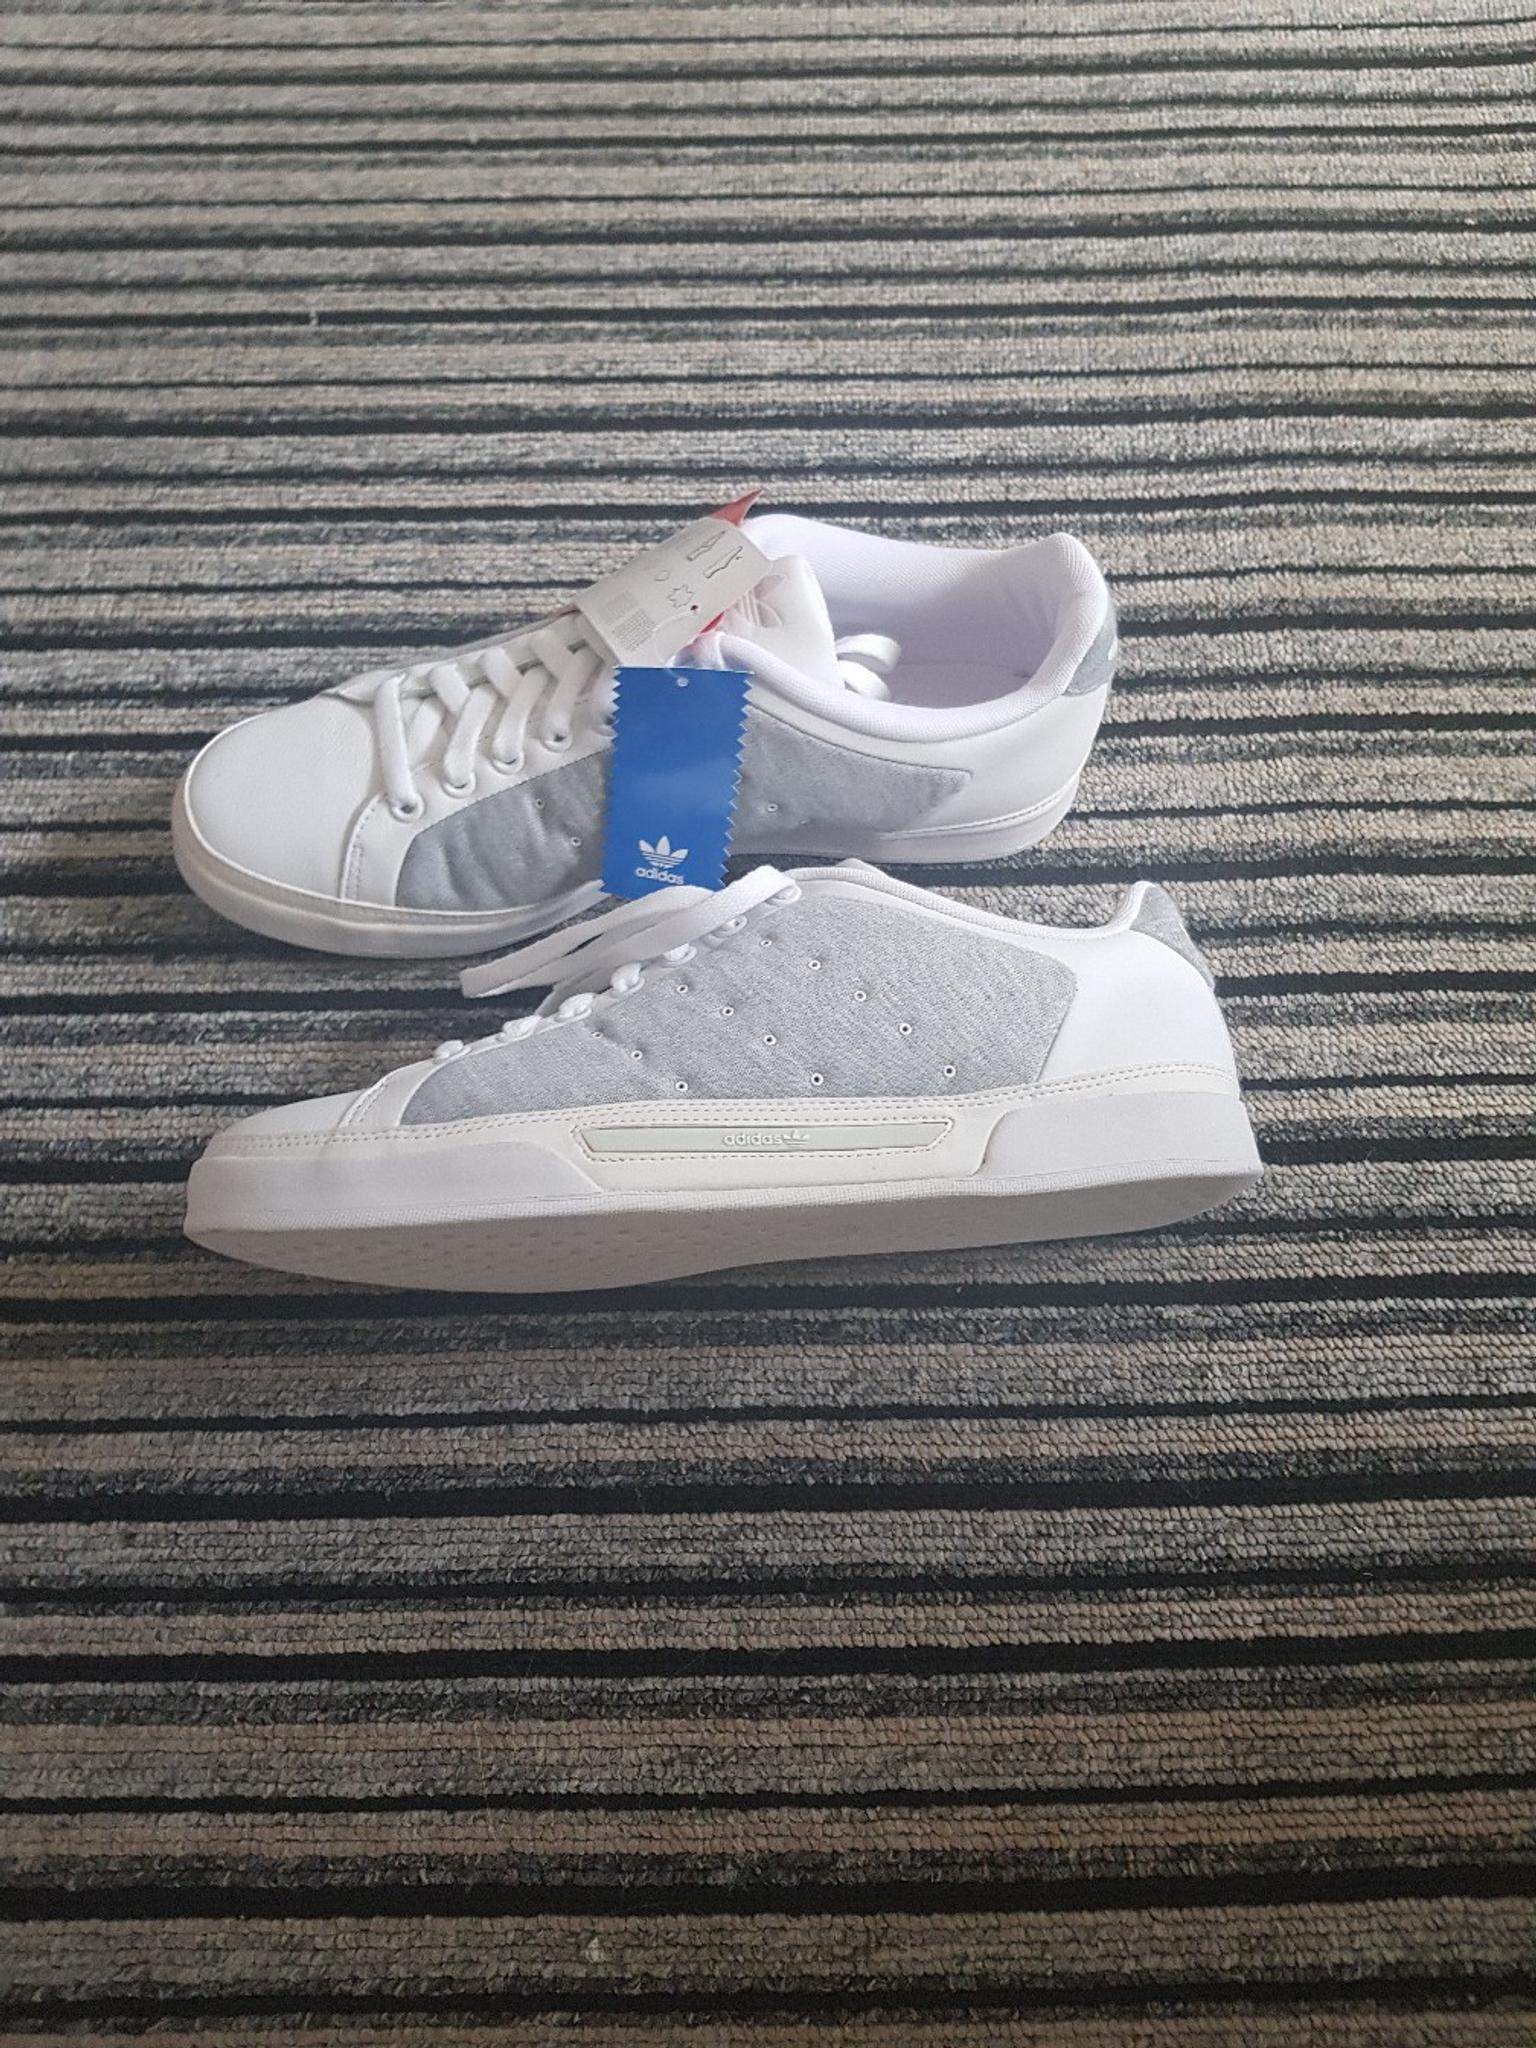 adidas trainers size 10